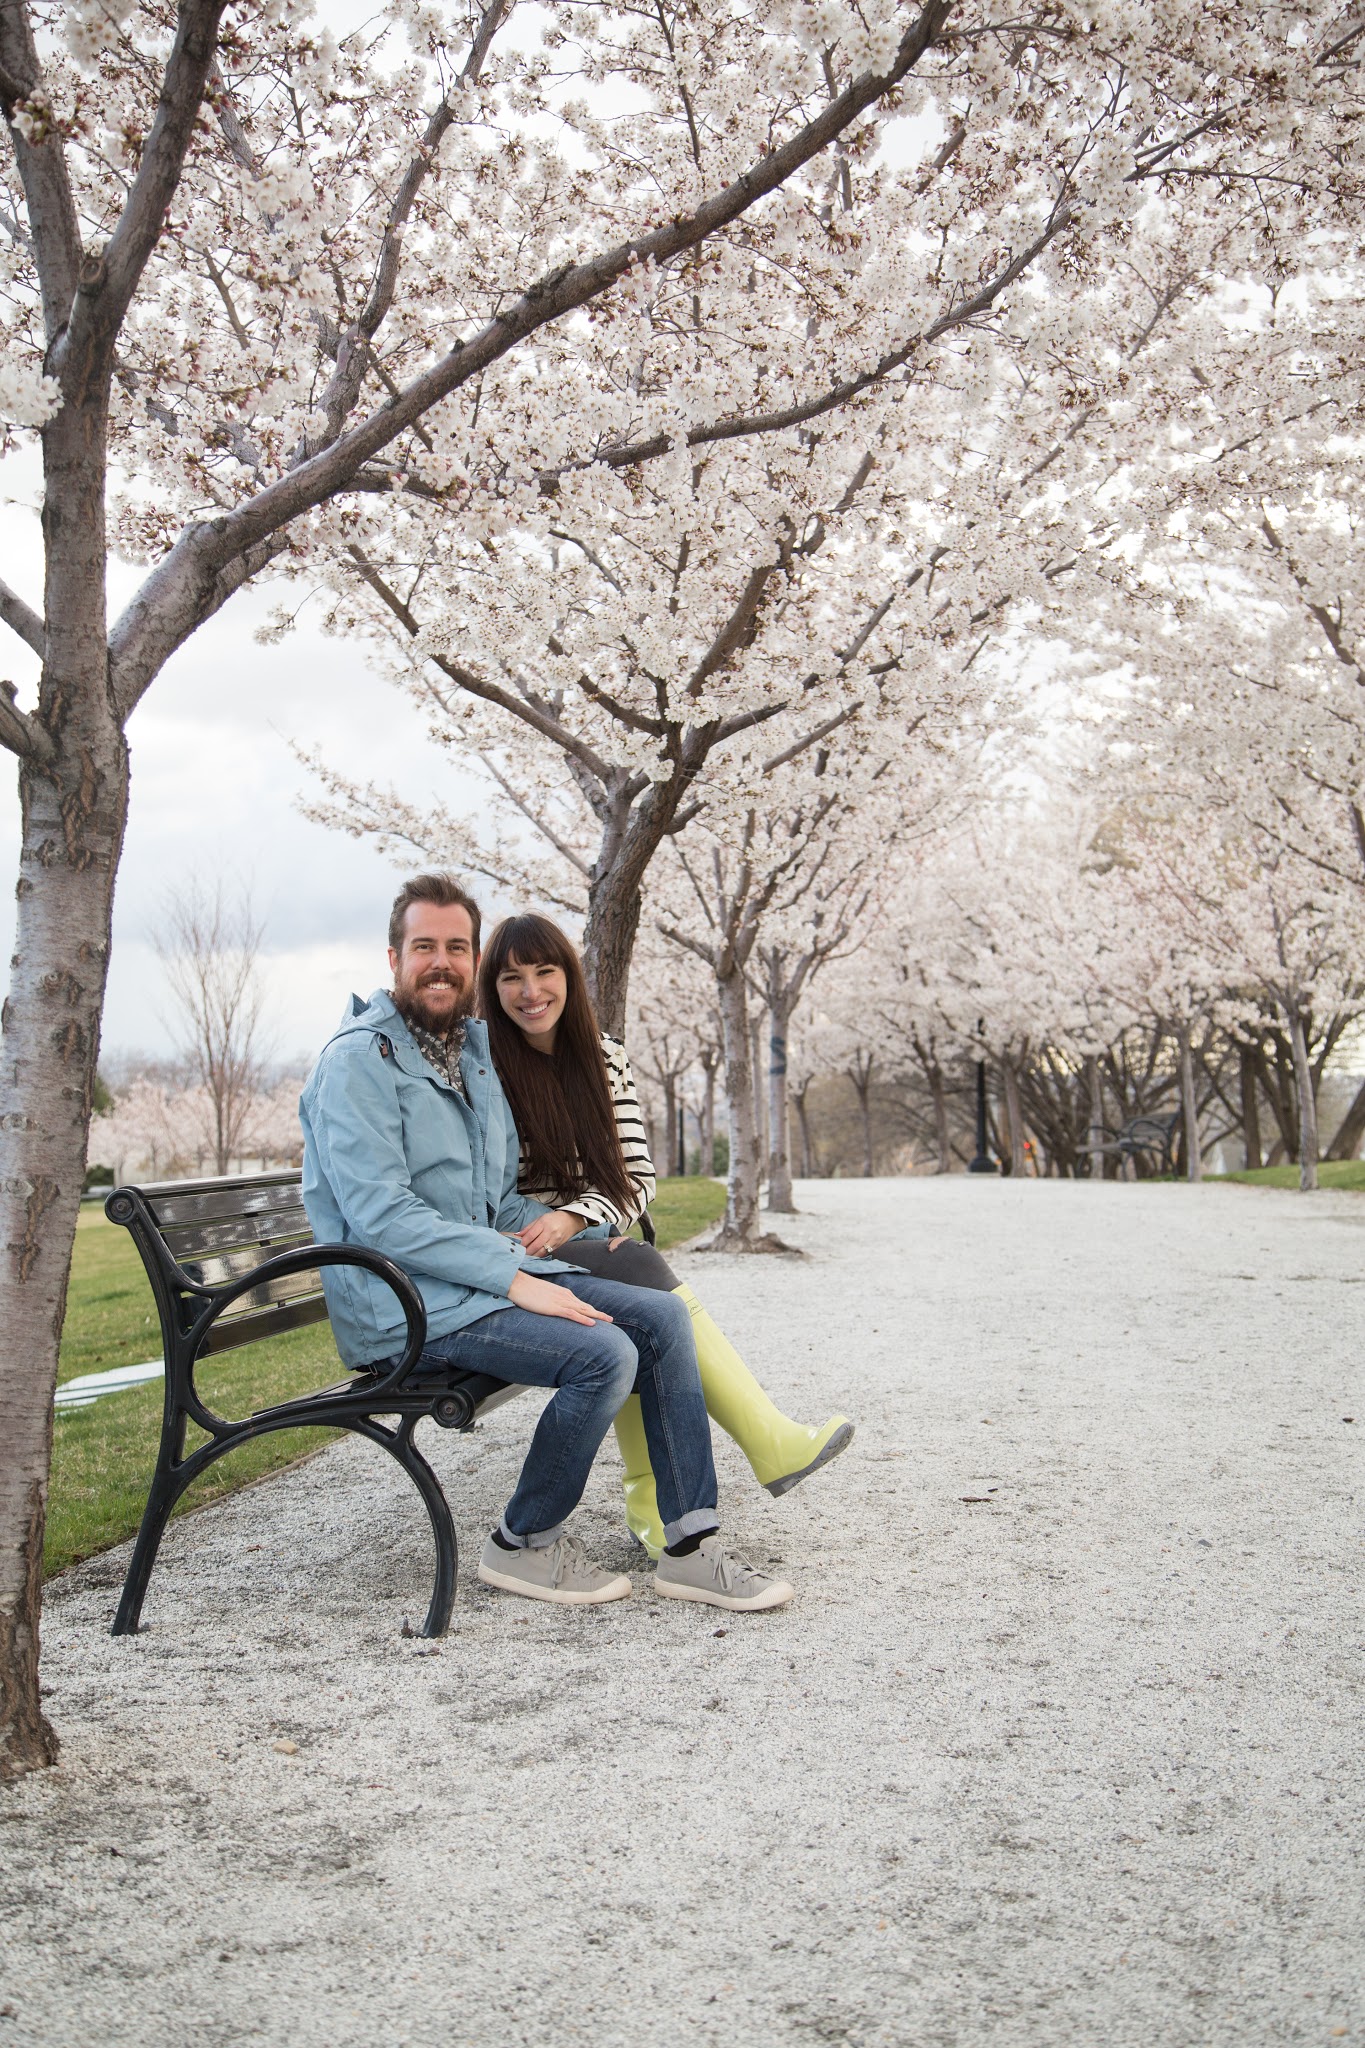 Couples Spring Style at the Utah State Capitol Blossoms